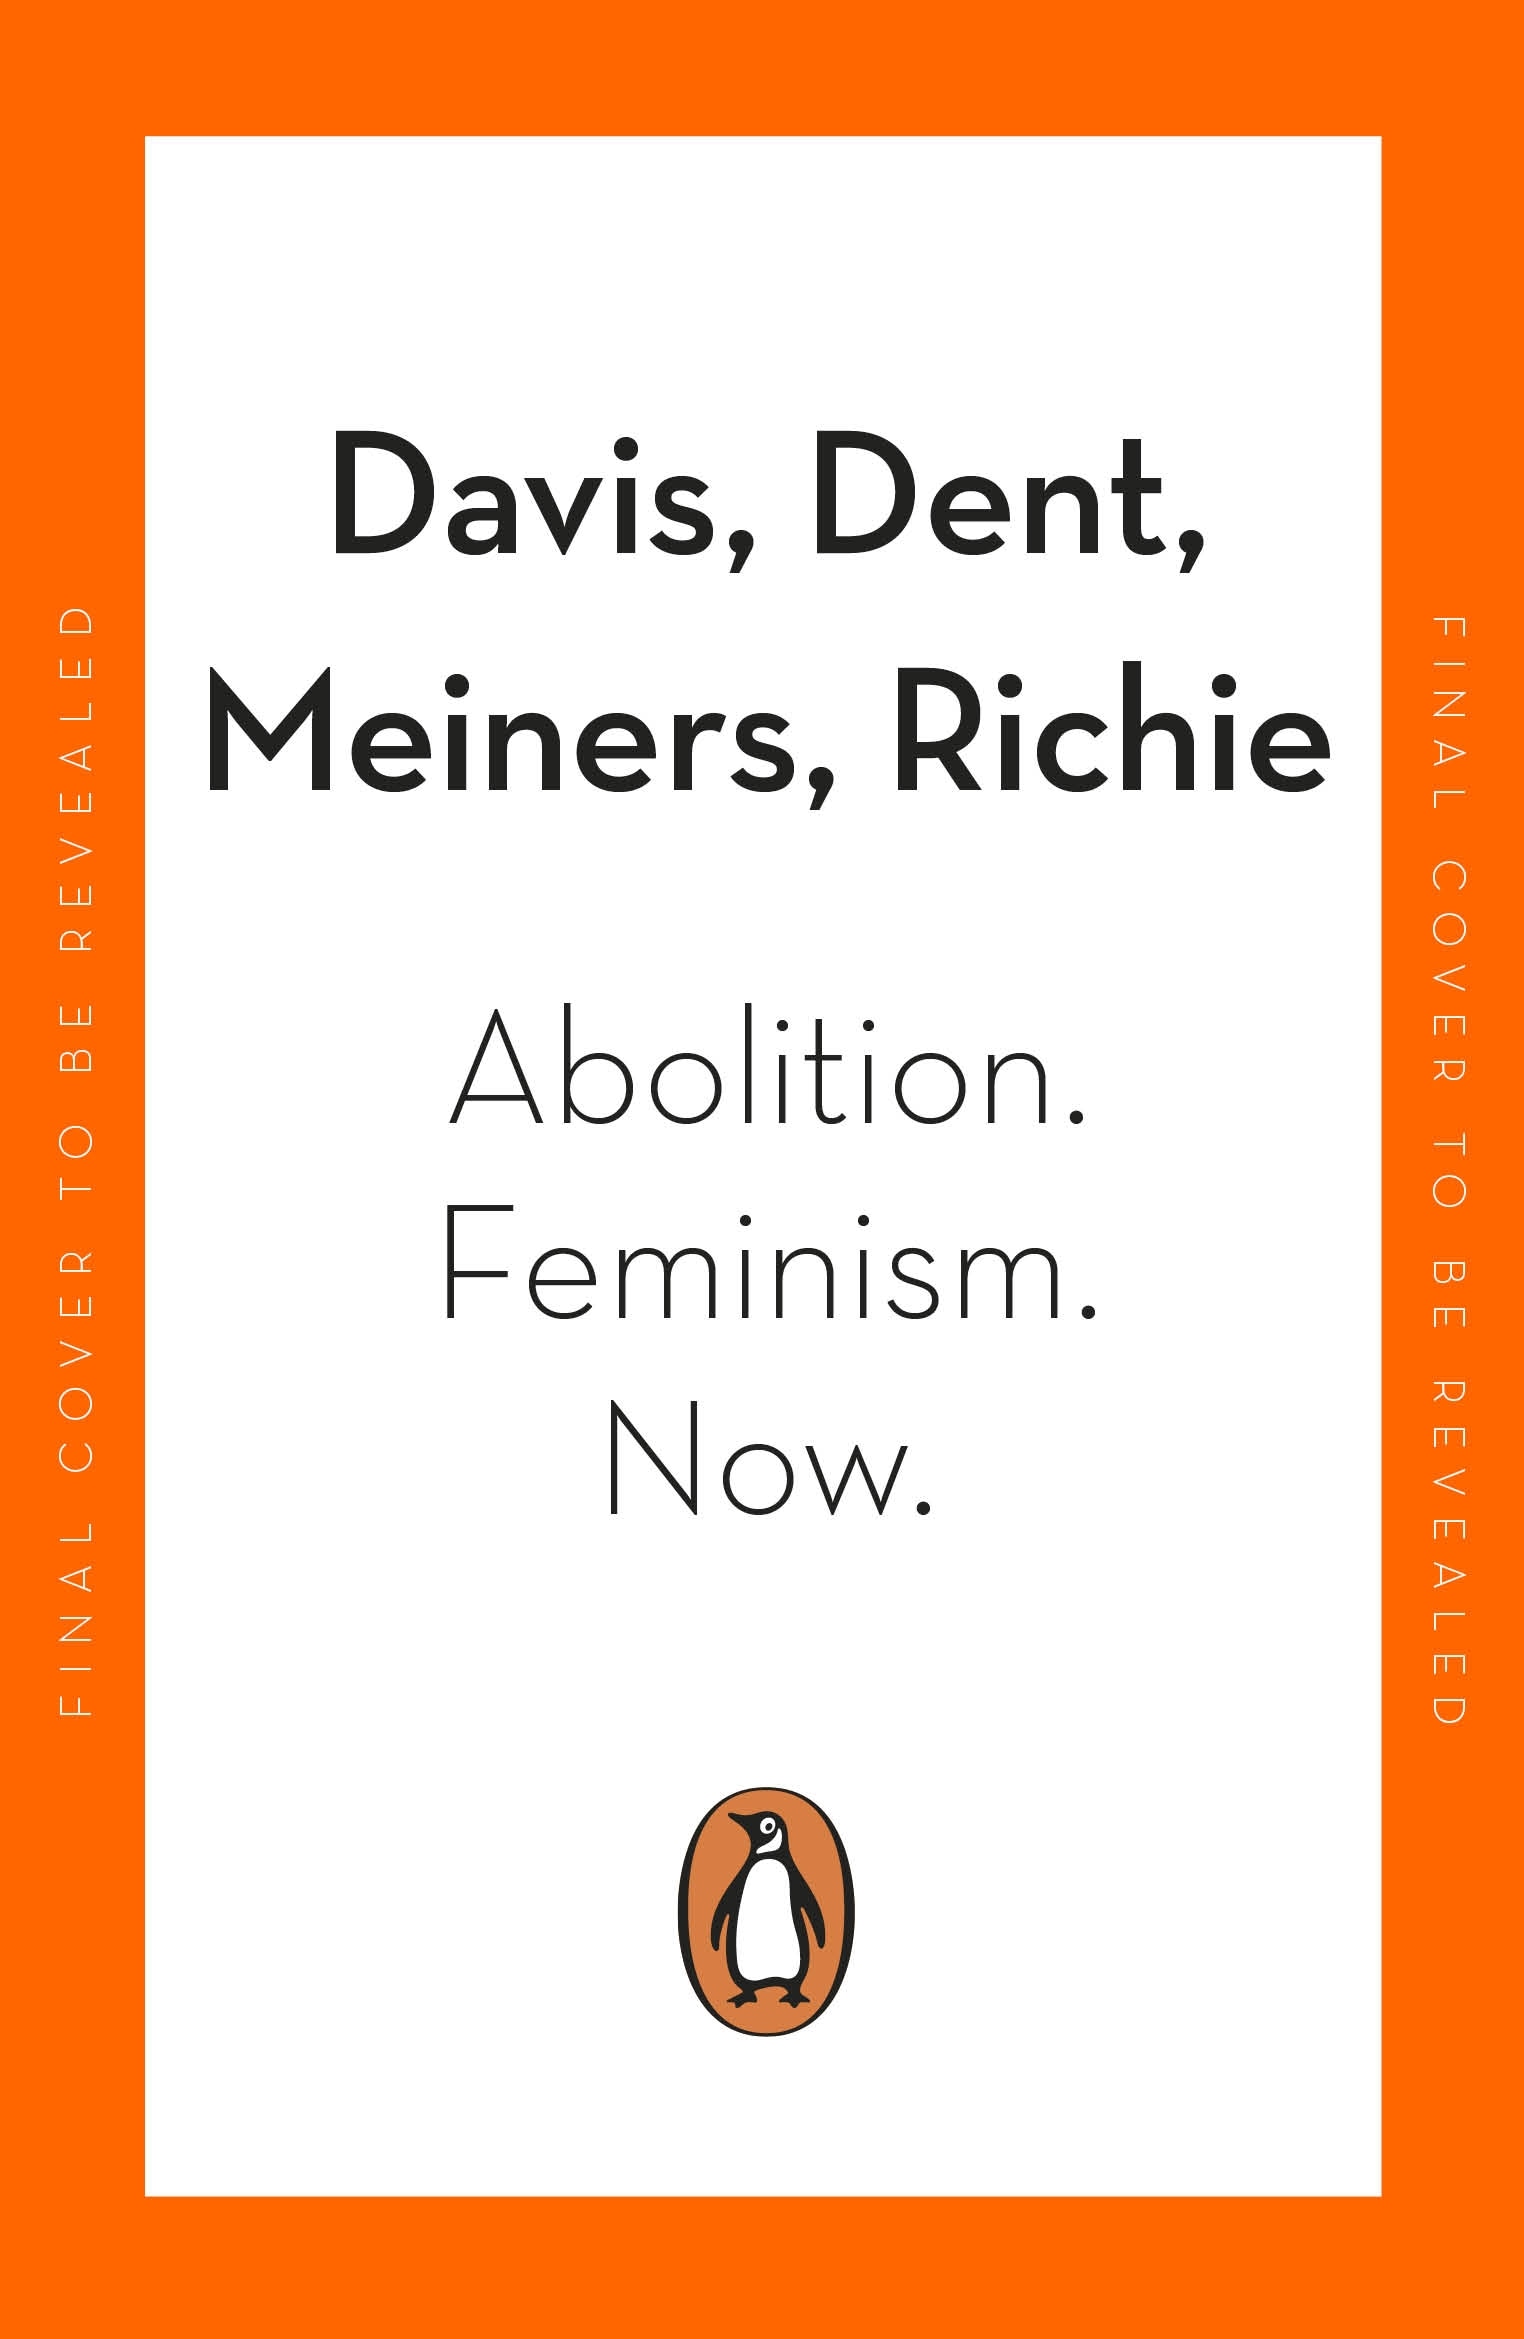 Book “Abolition. Feminism. Now.” by Angela Y. Davis — October 20, 2022